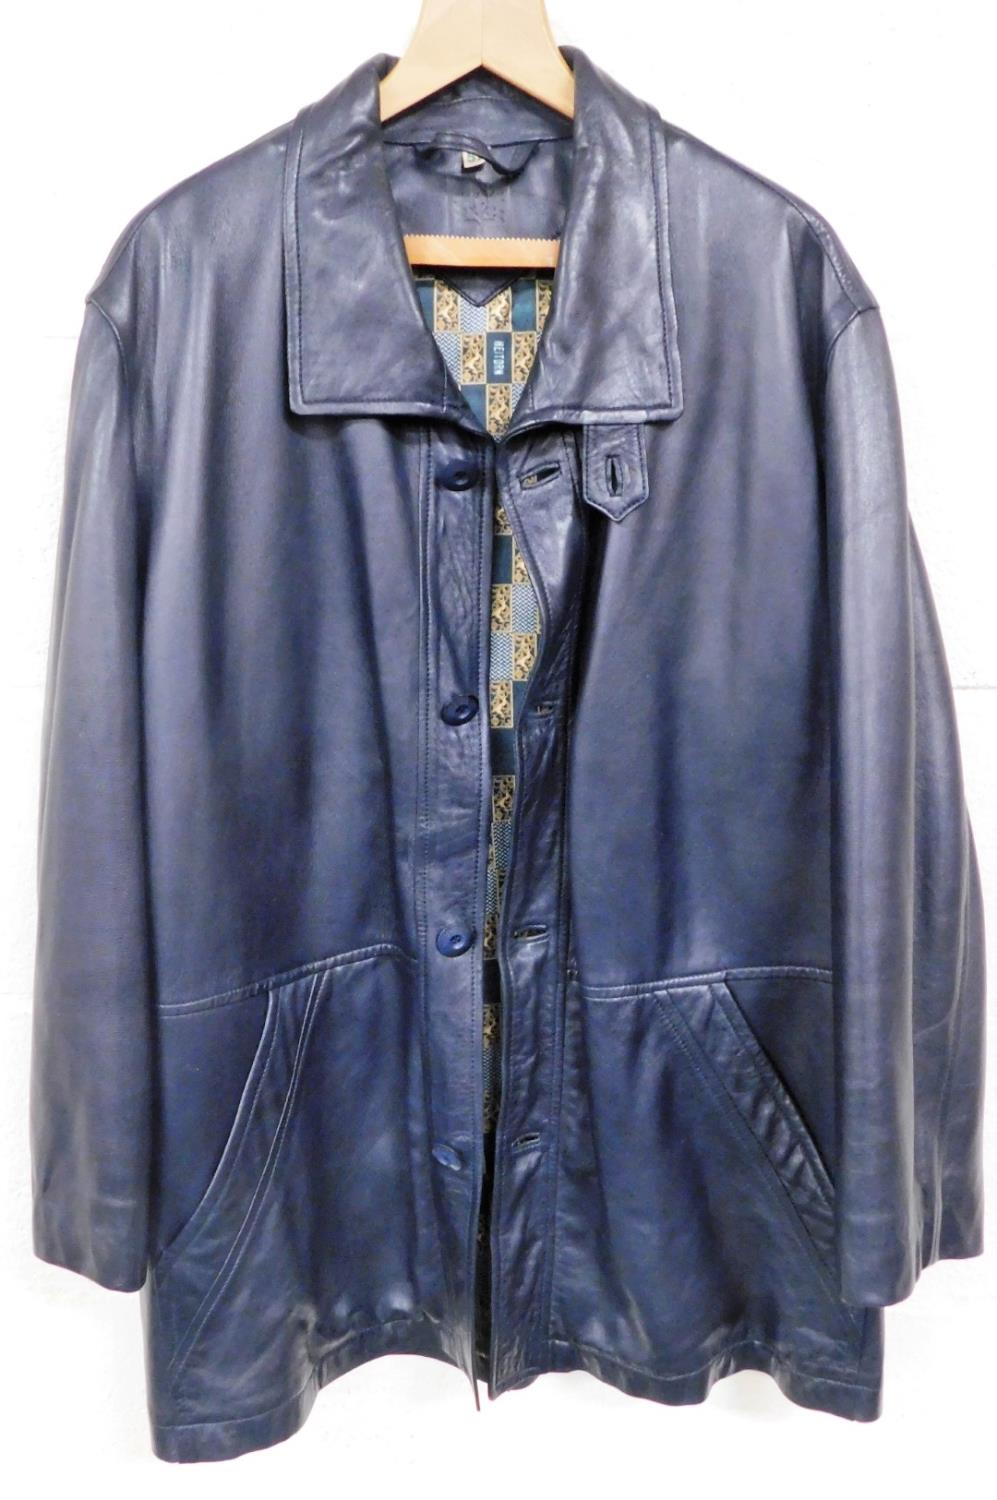 A Heitorn gentleman's blue leather jacket, with elaborate gold scroll Heitorn interior, size 52.